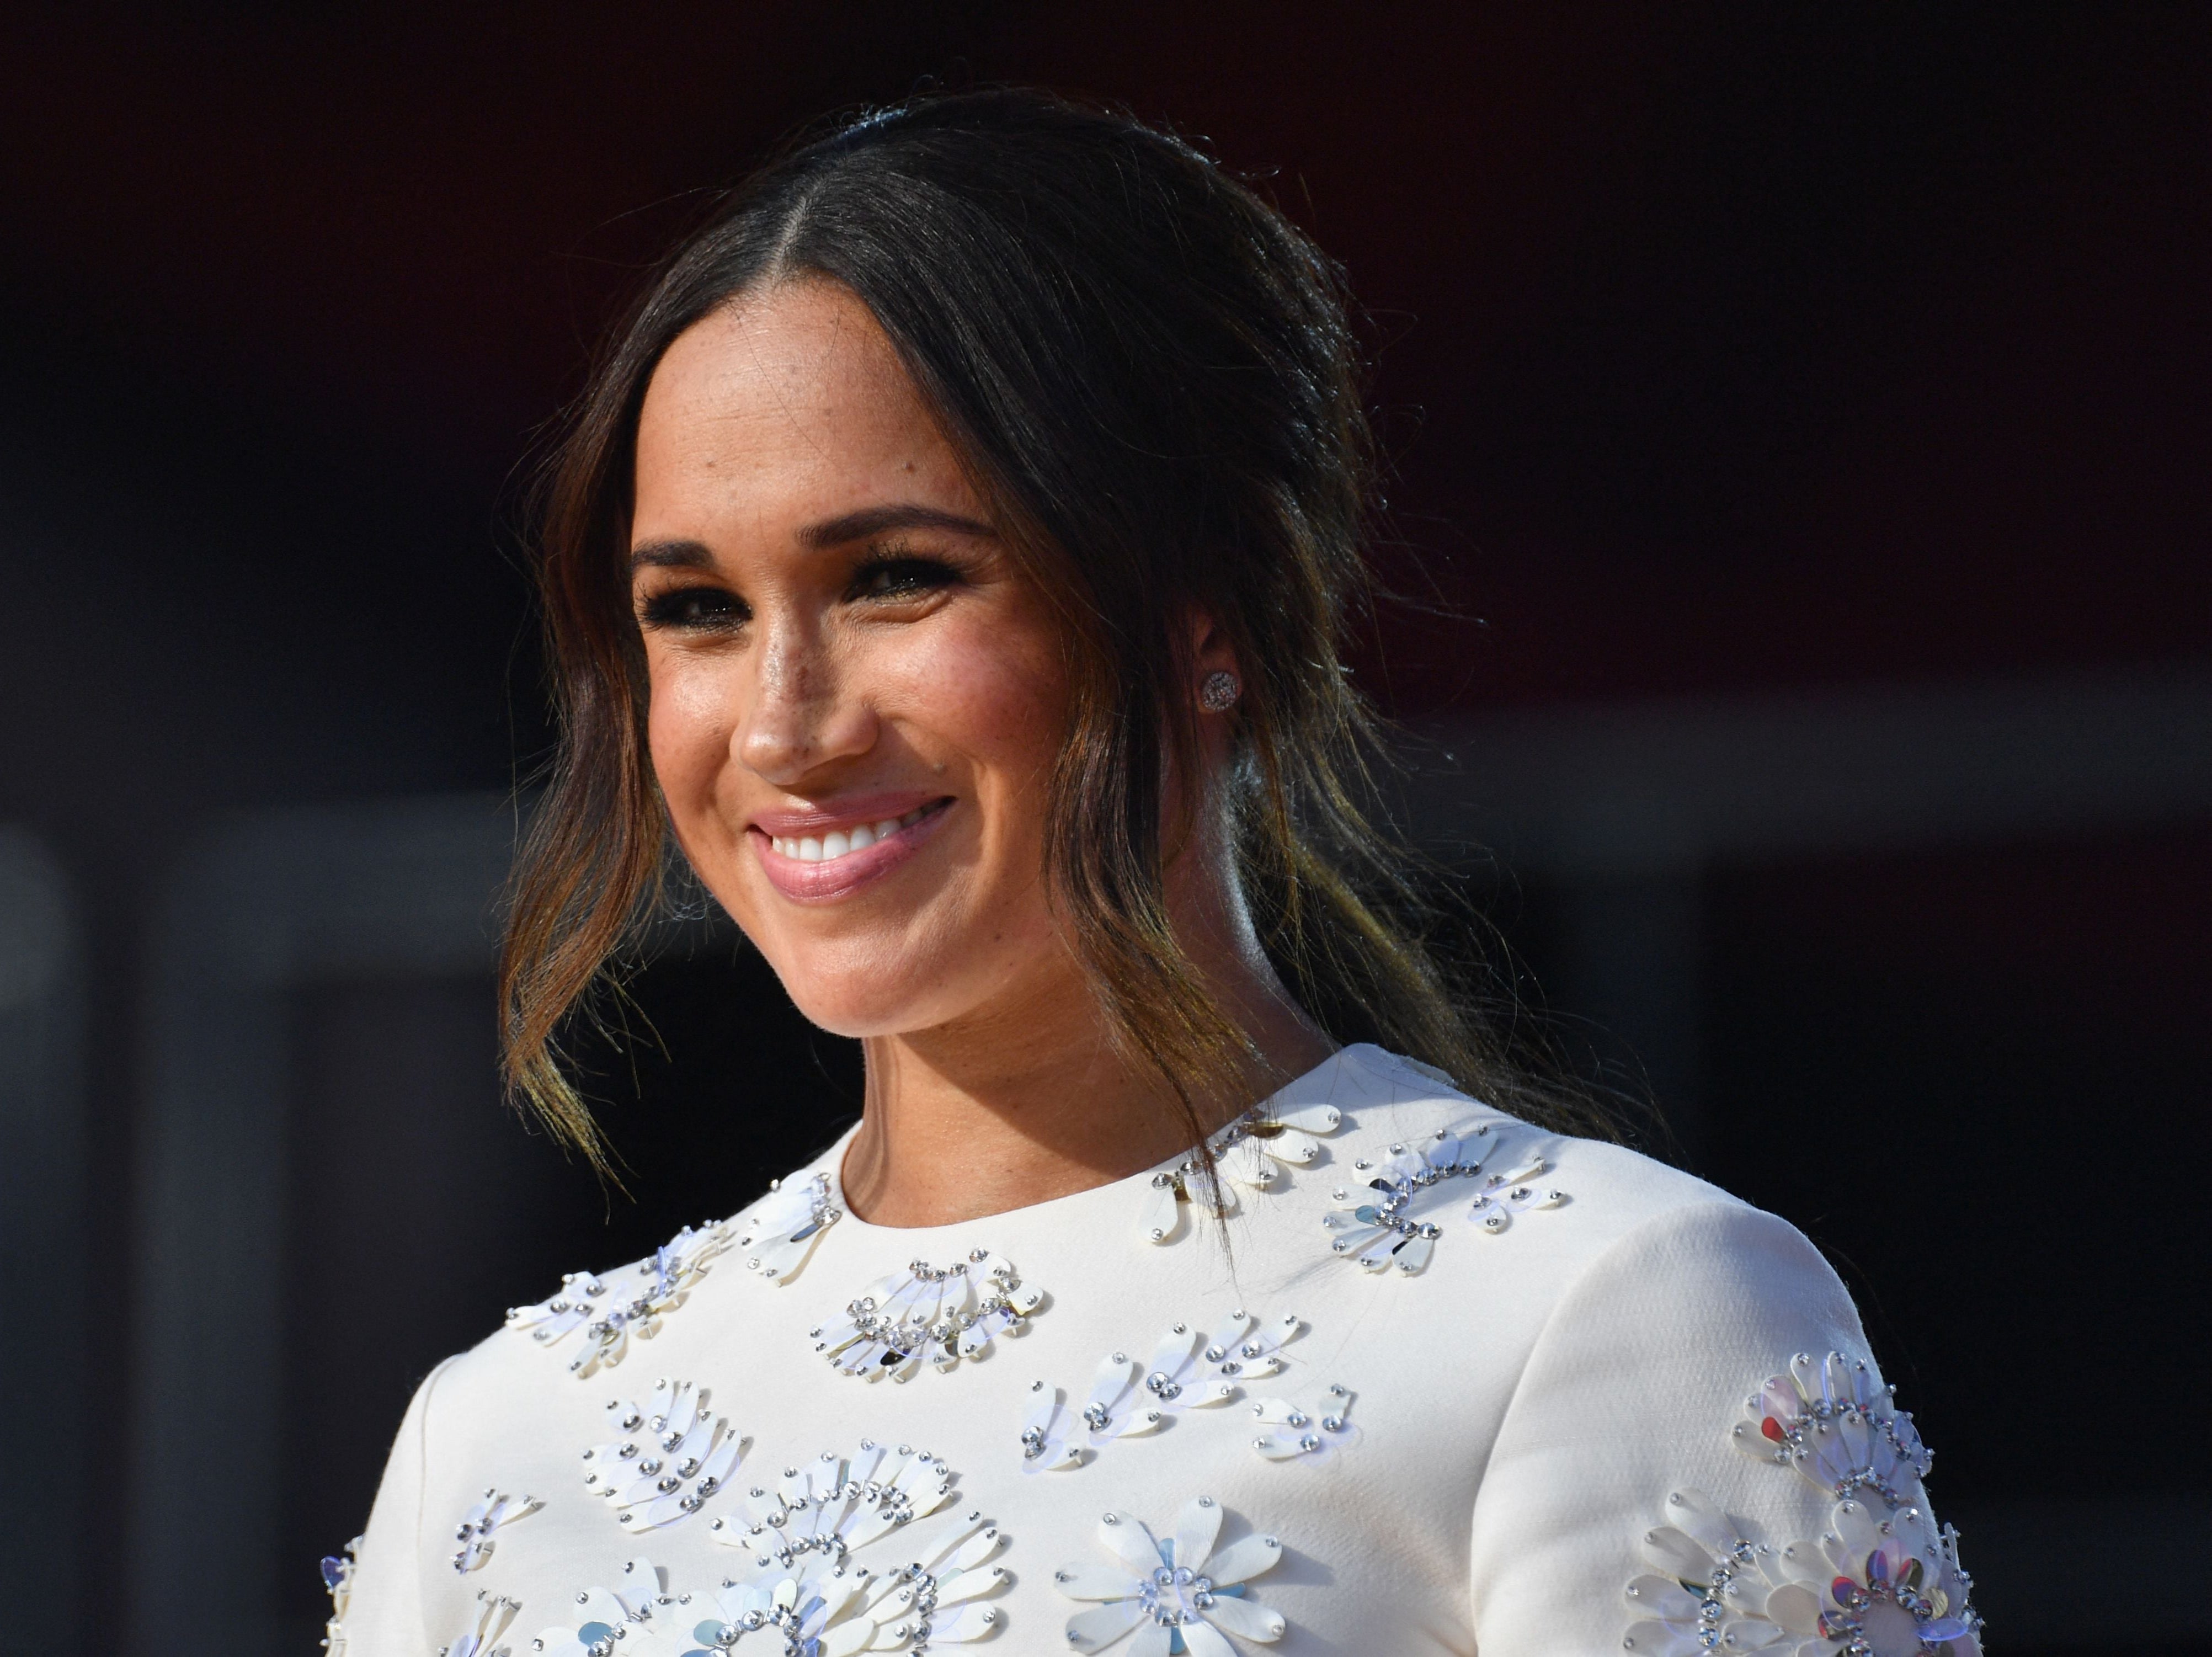 Meghan Markle told a former aide Harry faced ‘constant berating’ from the royal family over her estranged father, text messages have revealed